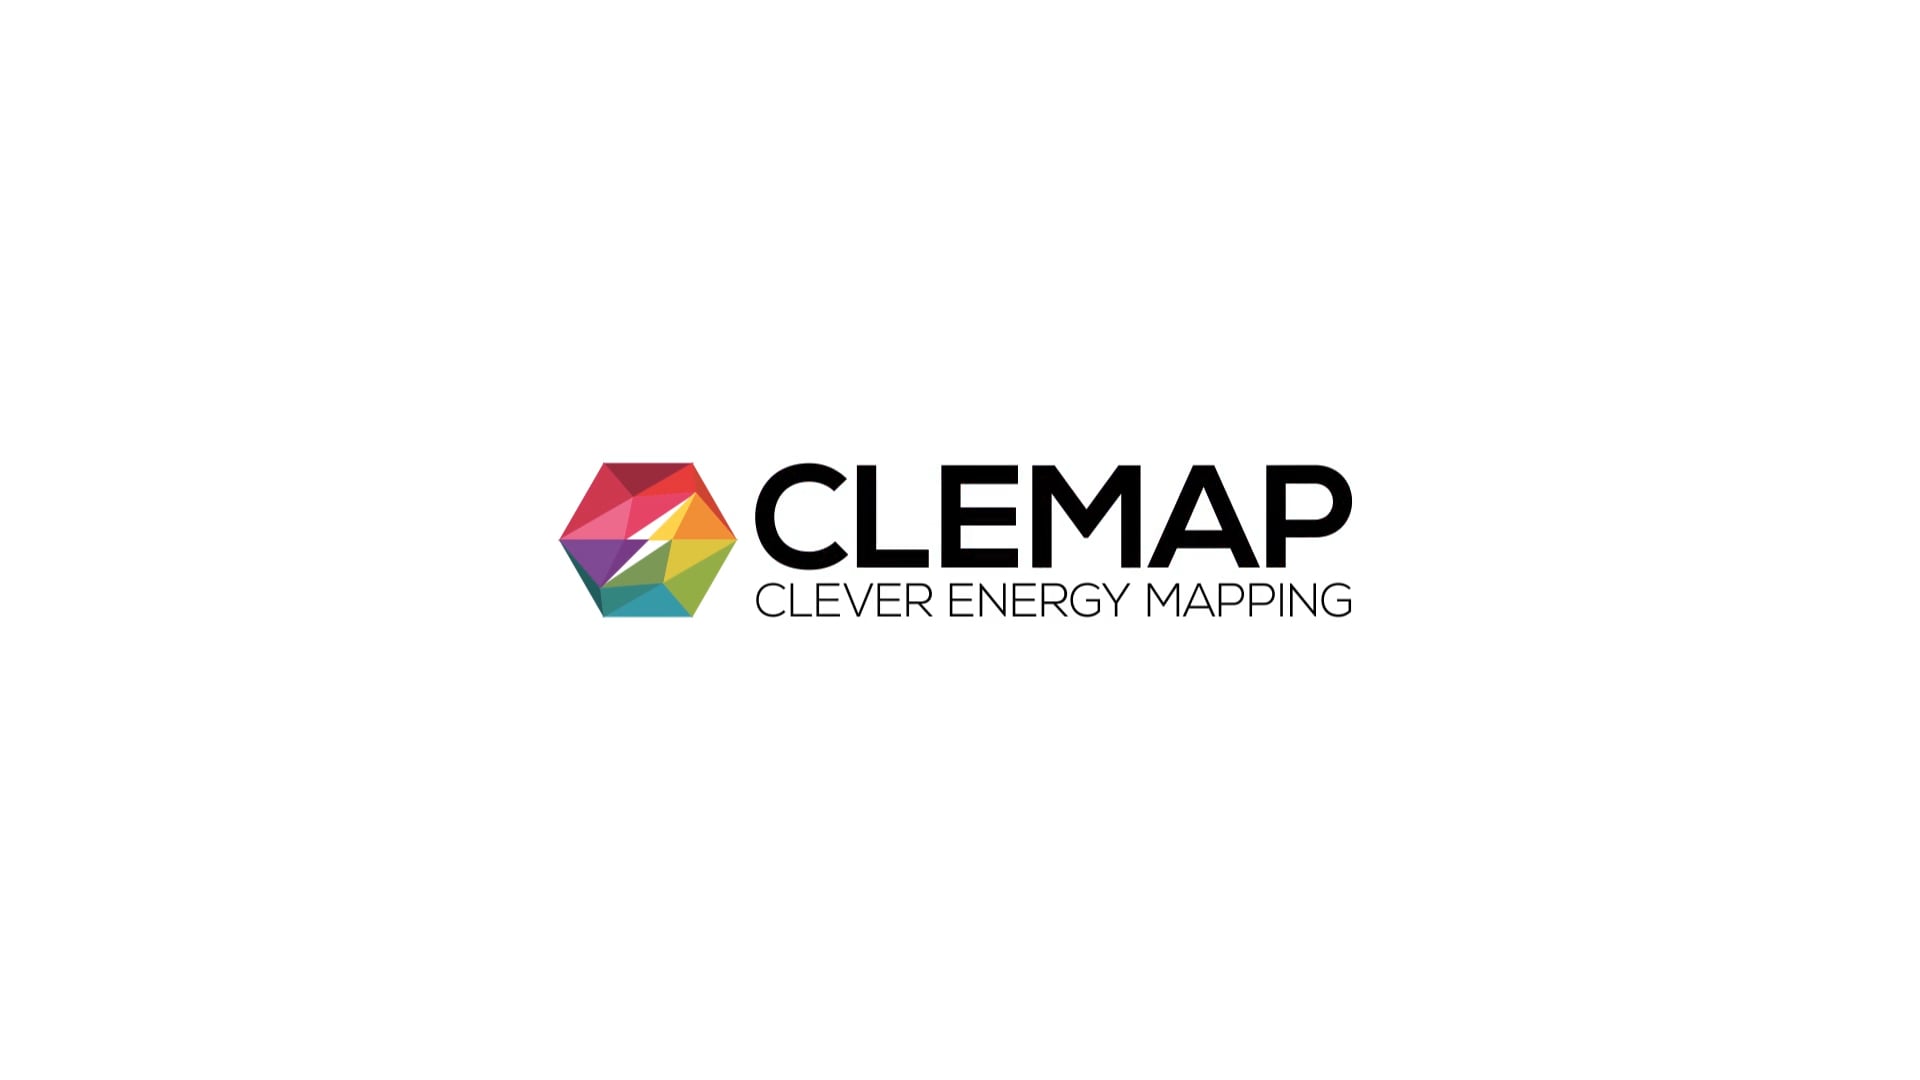 Clemap - Clever energy mapping - De